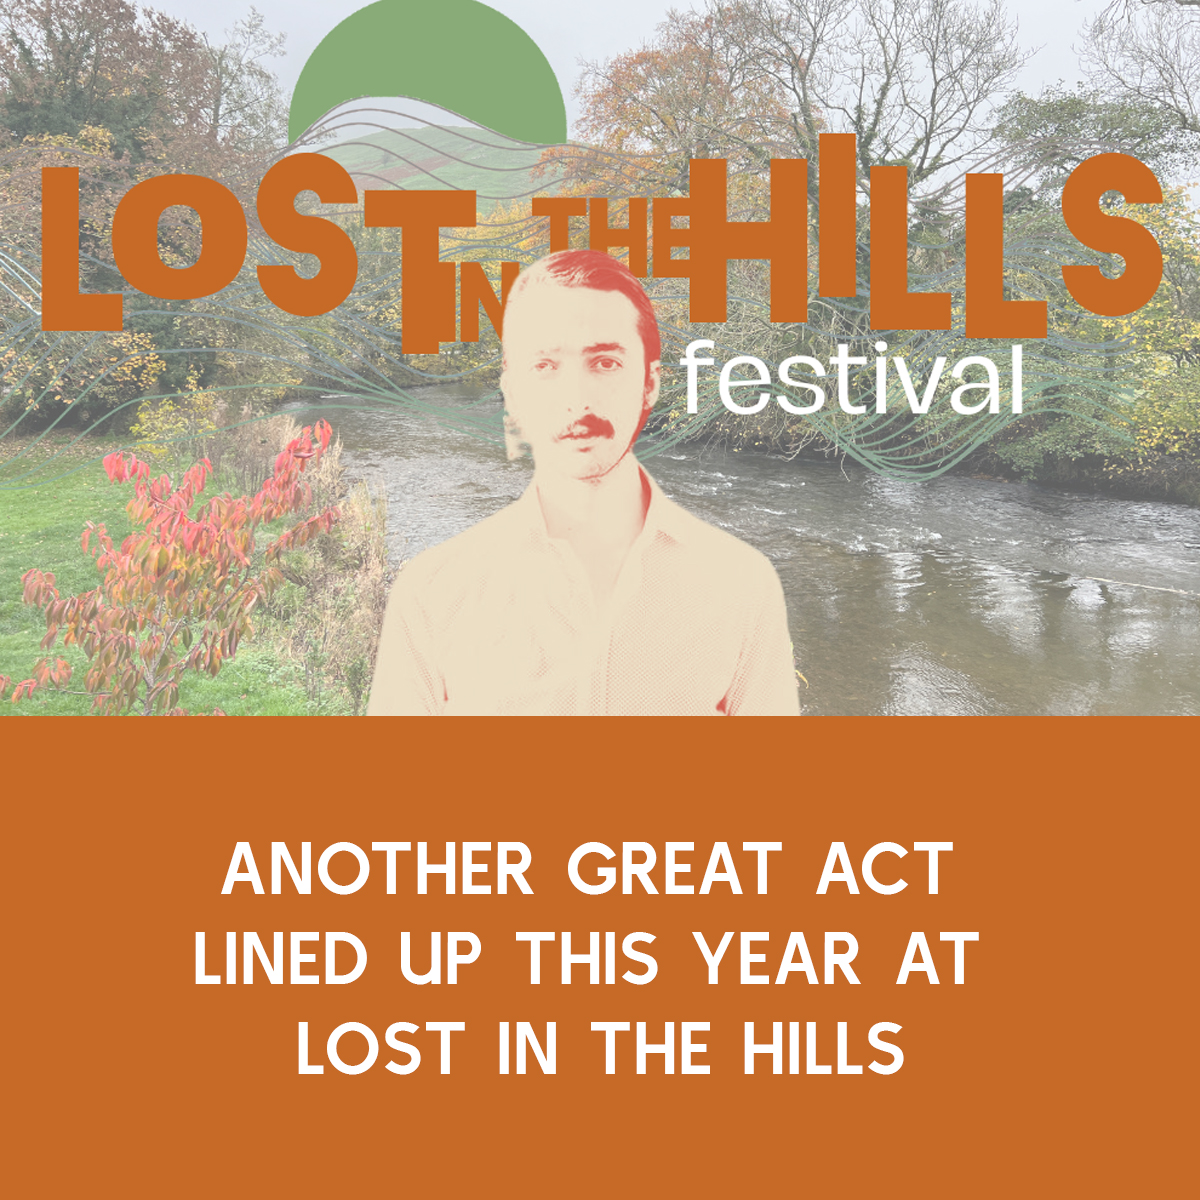 Another great act lined up this year at Lost in the Hills. Read all about Raoul Vignal who is joining this Peak District Music Festival. artsderbyshire.org.uk/news/festivals… #derbyshirefestivals #artsderbyshire #festivals #artsfestival #peakdistrict #derbyshire